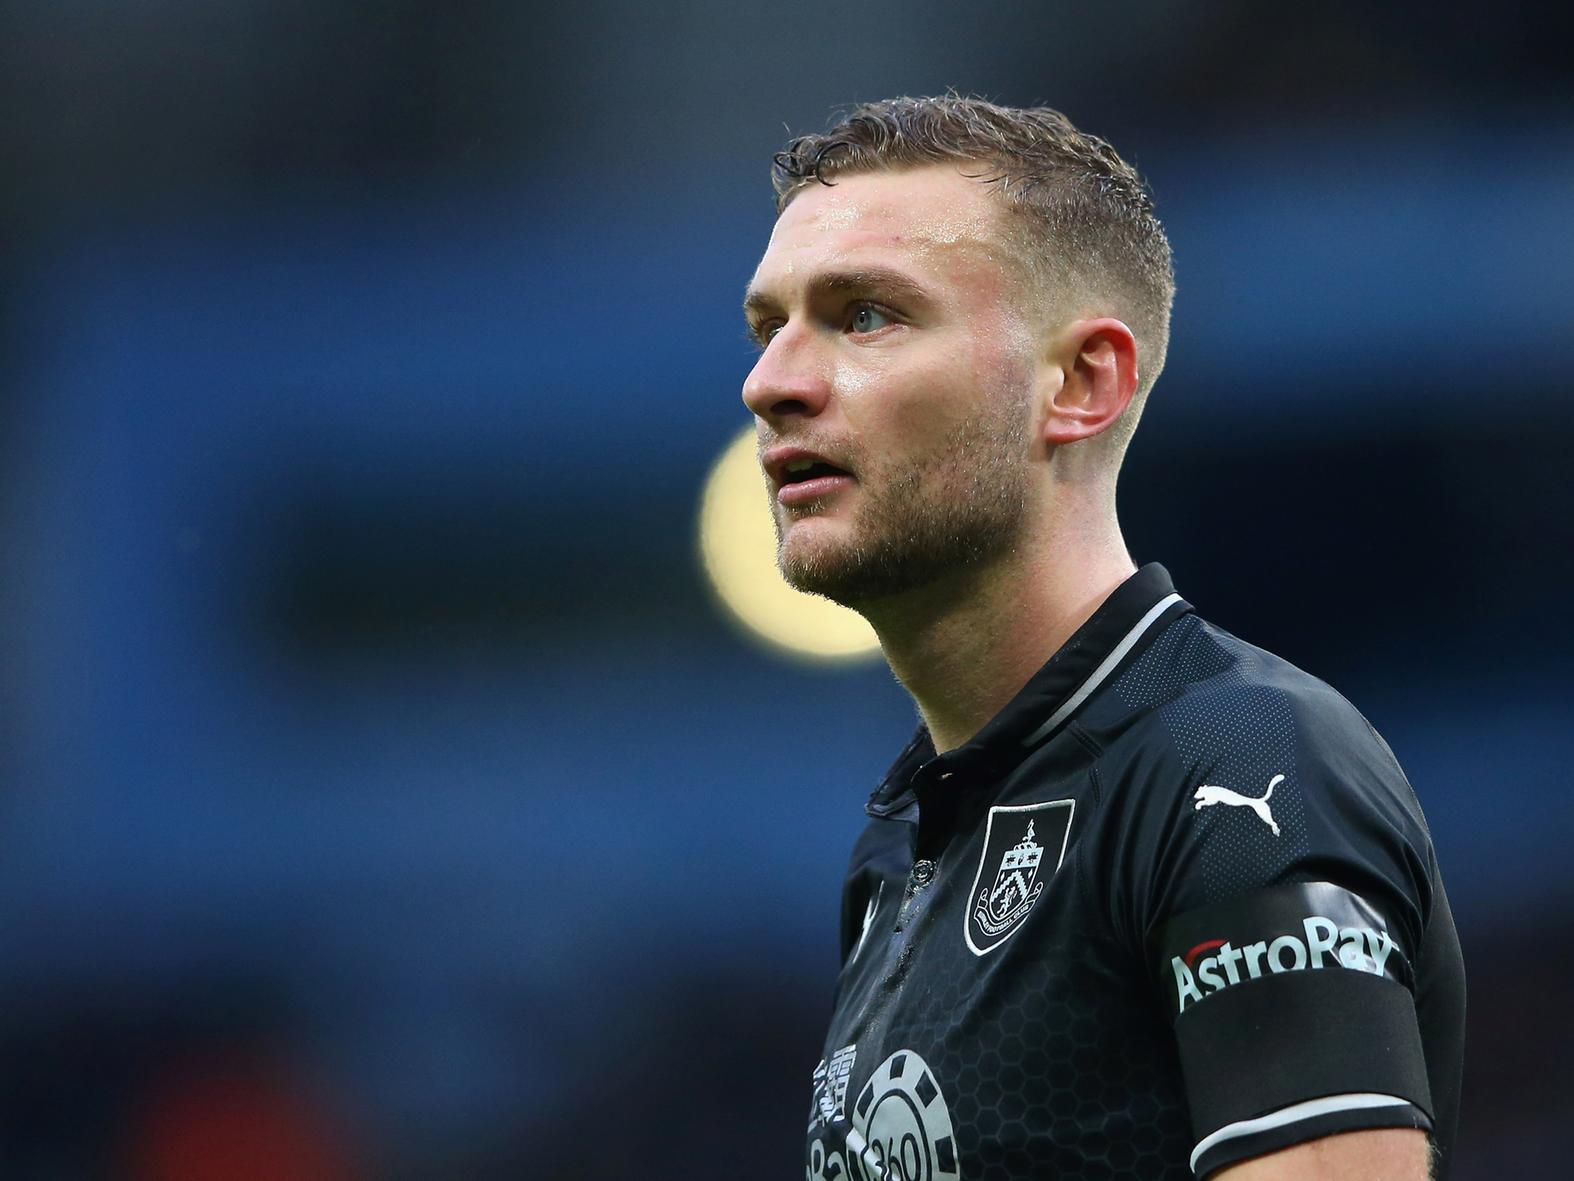 Nigel Pearson looks like he just might save the Hornets from relegation, and he wants a new defender to help the cause. They're relentlessly pursuing Burnley outcast Ben Gibson.